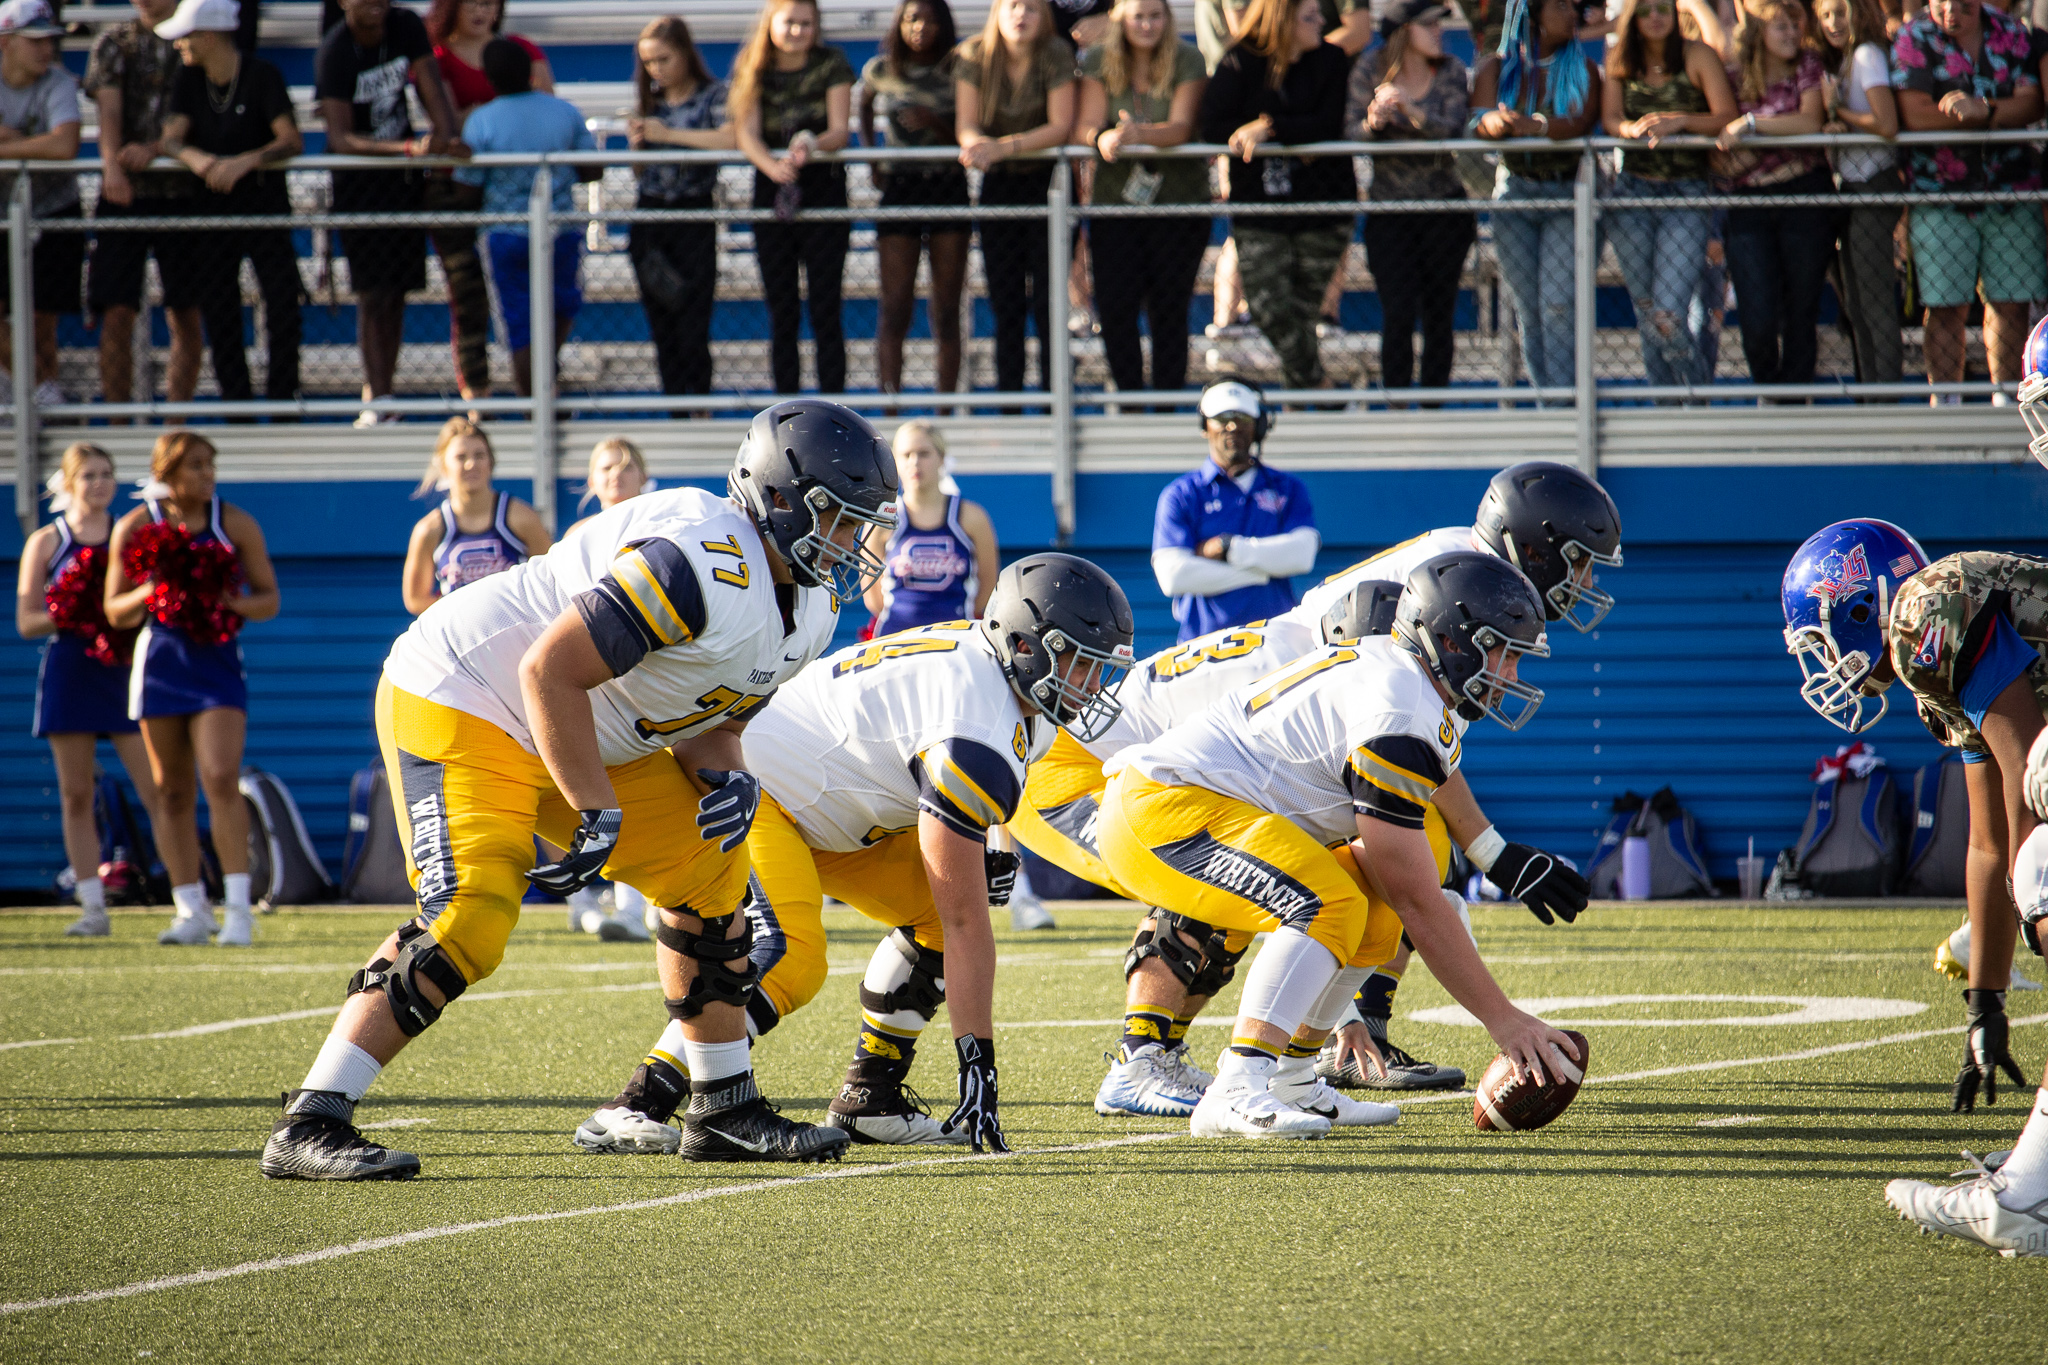 About — Whitmer Panthers Football